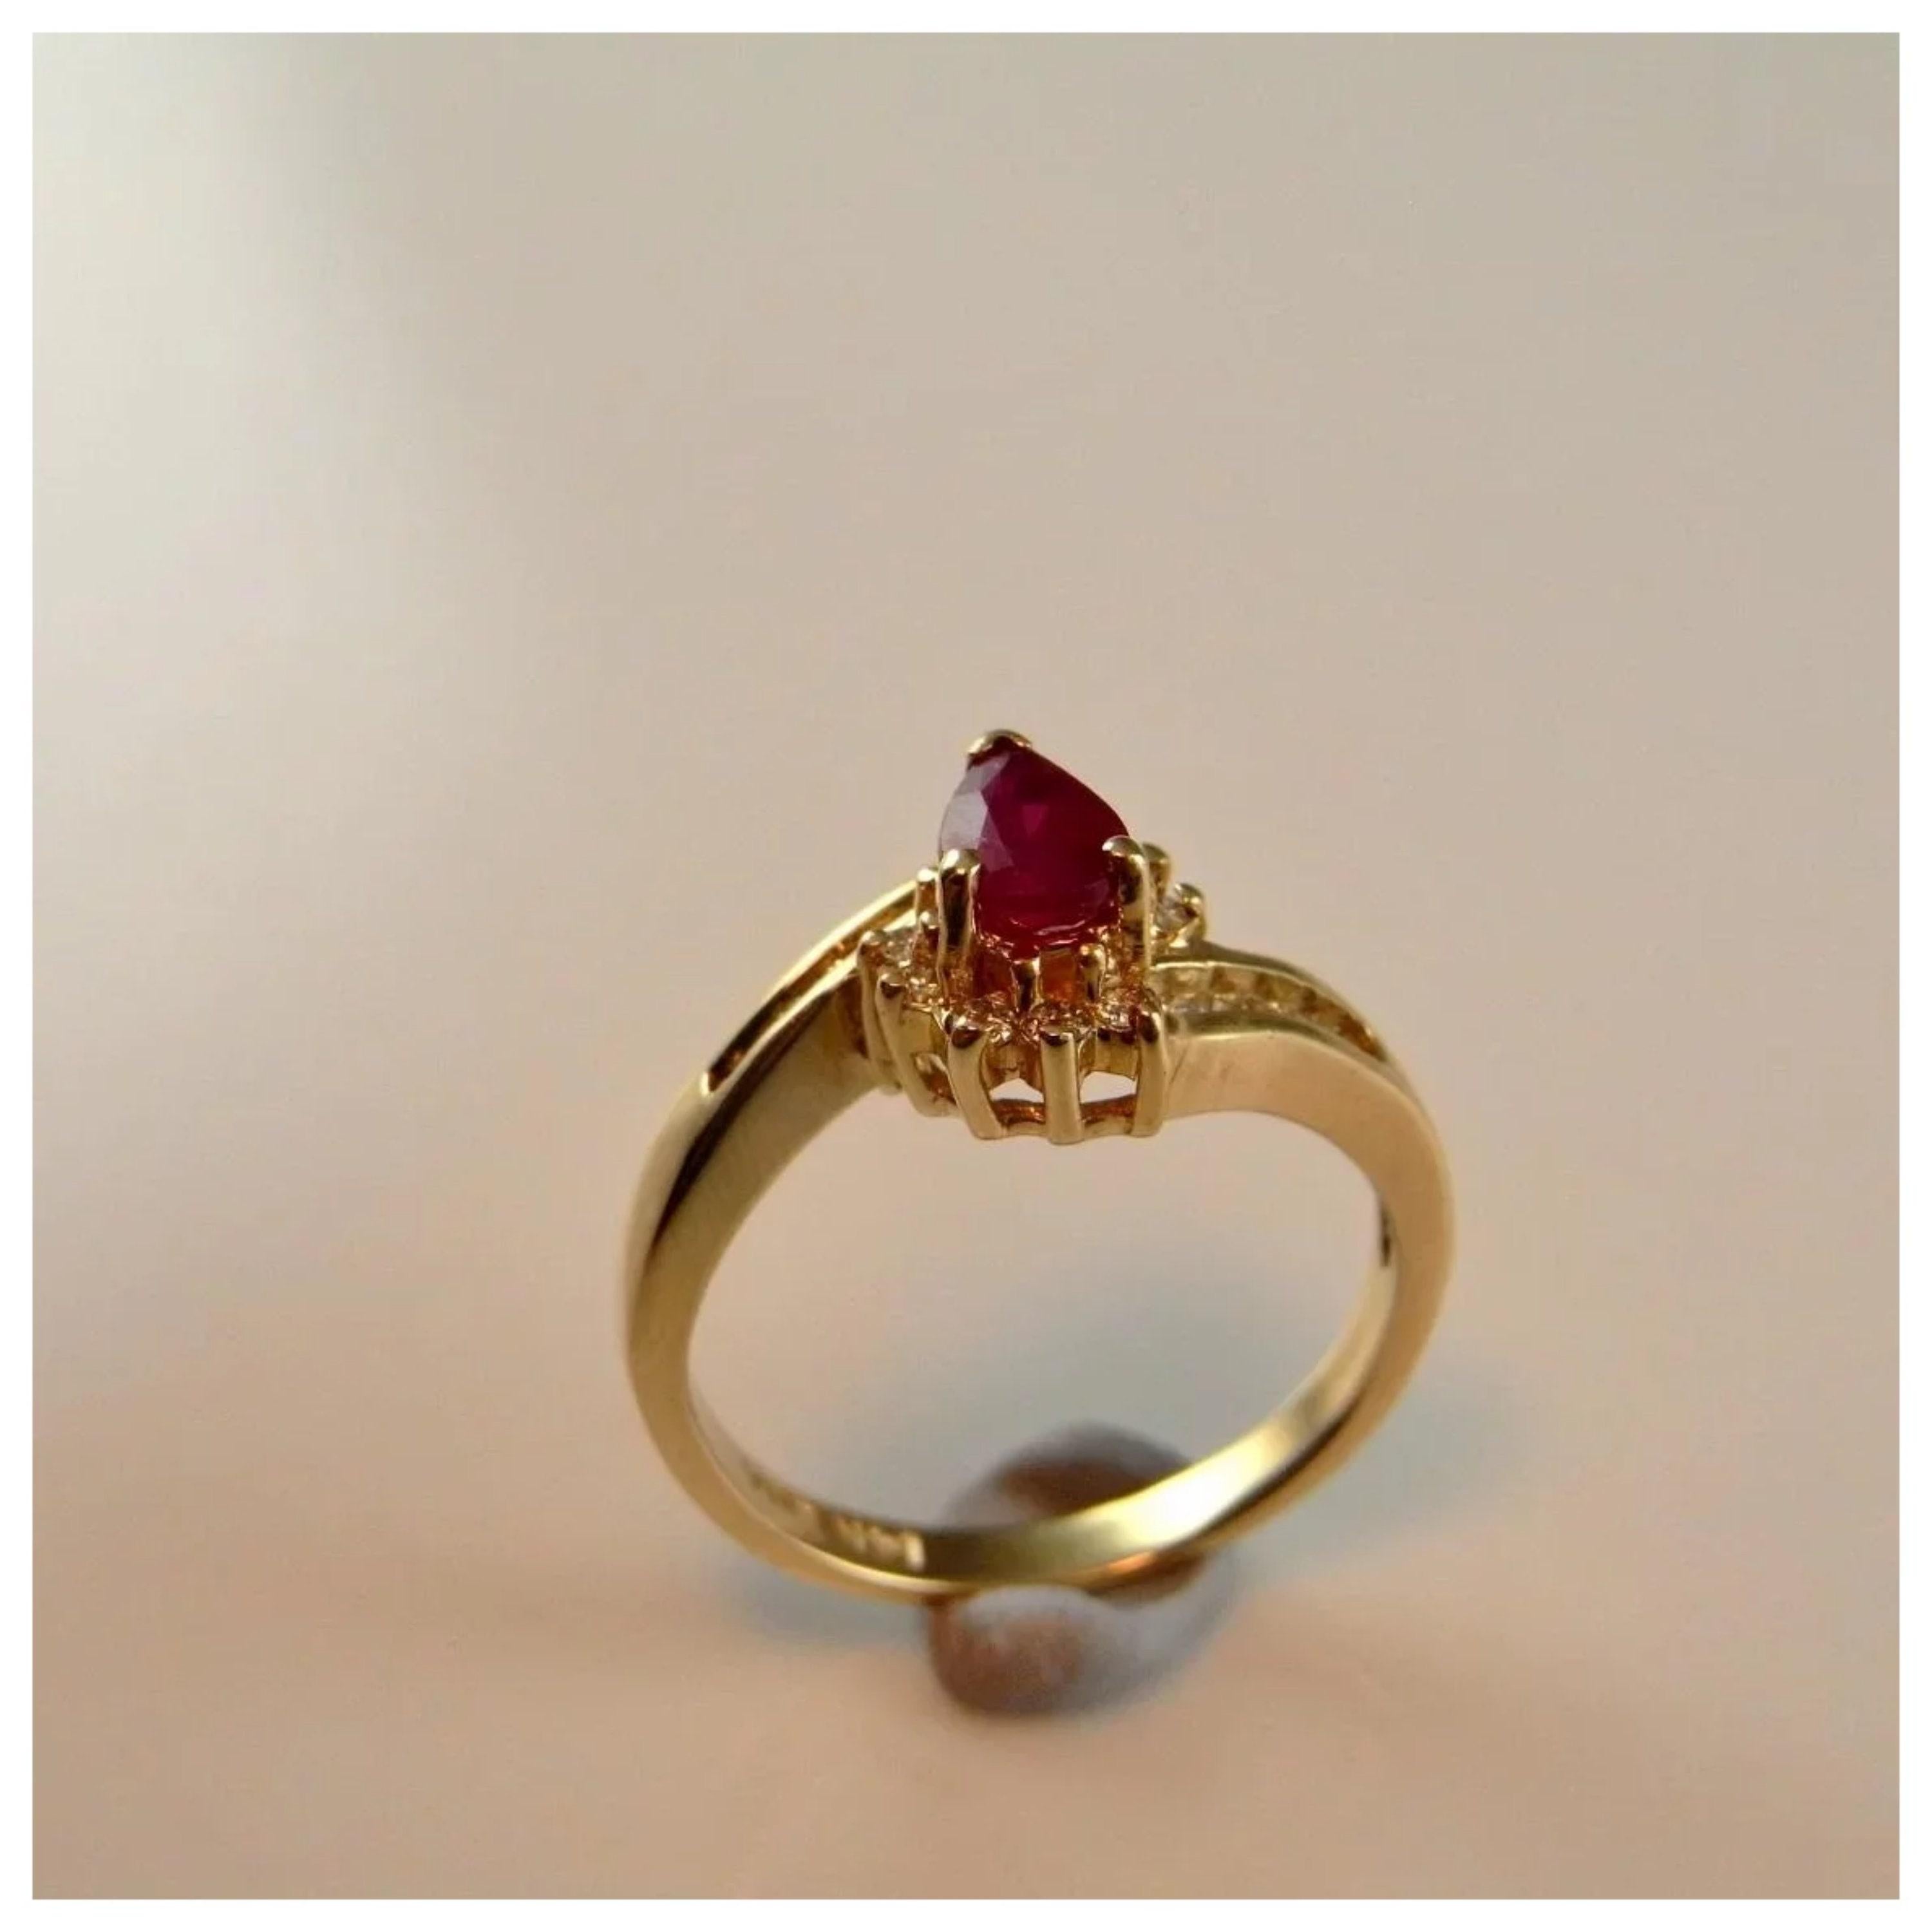 For Sale:  Certified Pear Cut Ruby and Diamond Yellow Gold Engagement Ring Wedding Ring 2